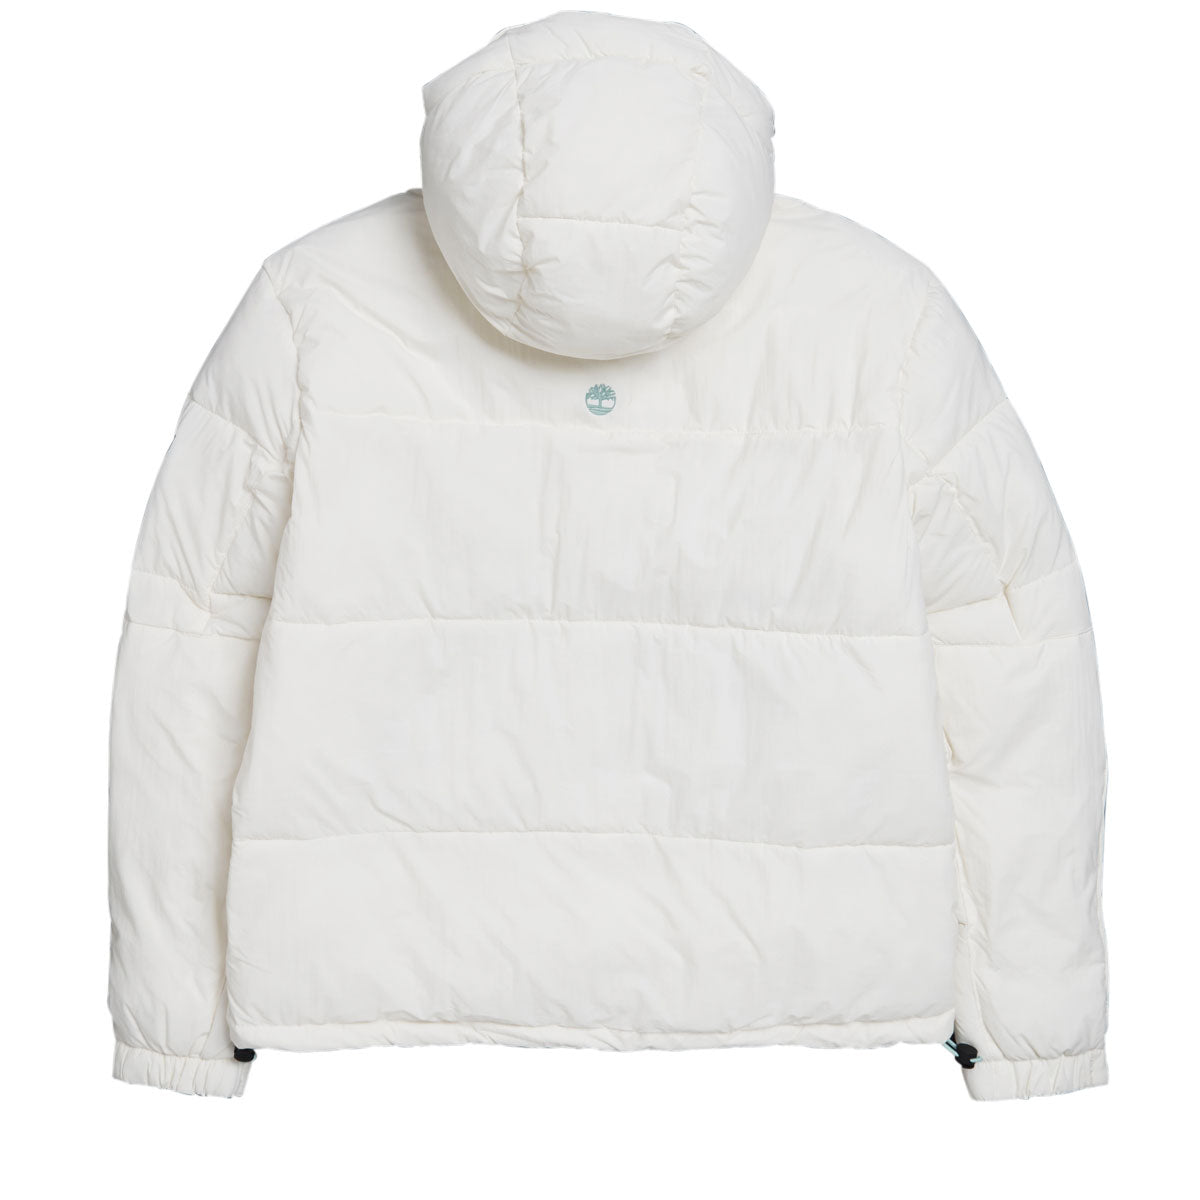 Timberland DWR Outdoor Archive Puffer Jacket - Solitary Star image 2